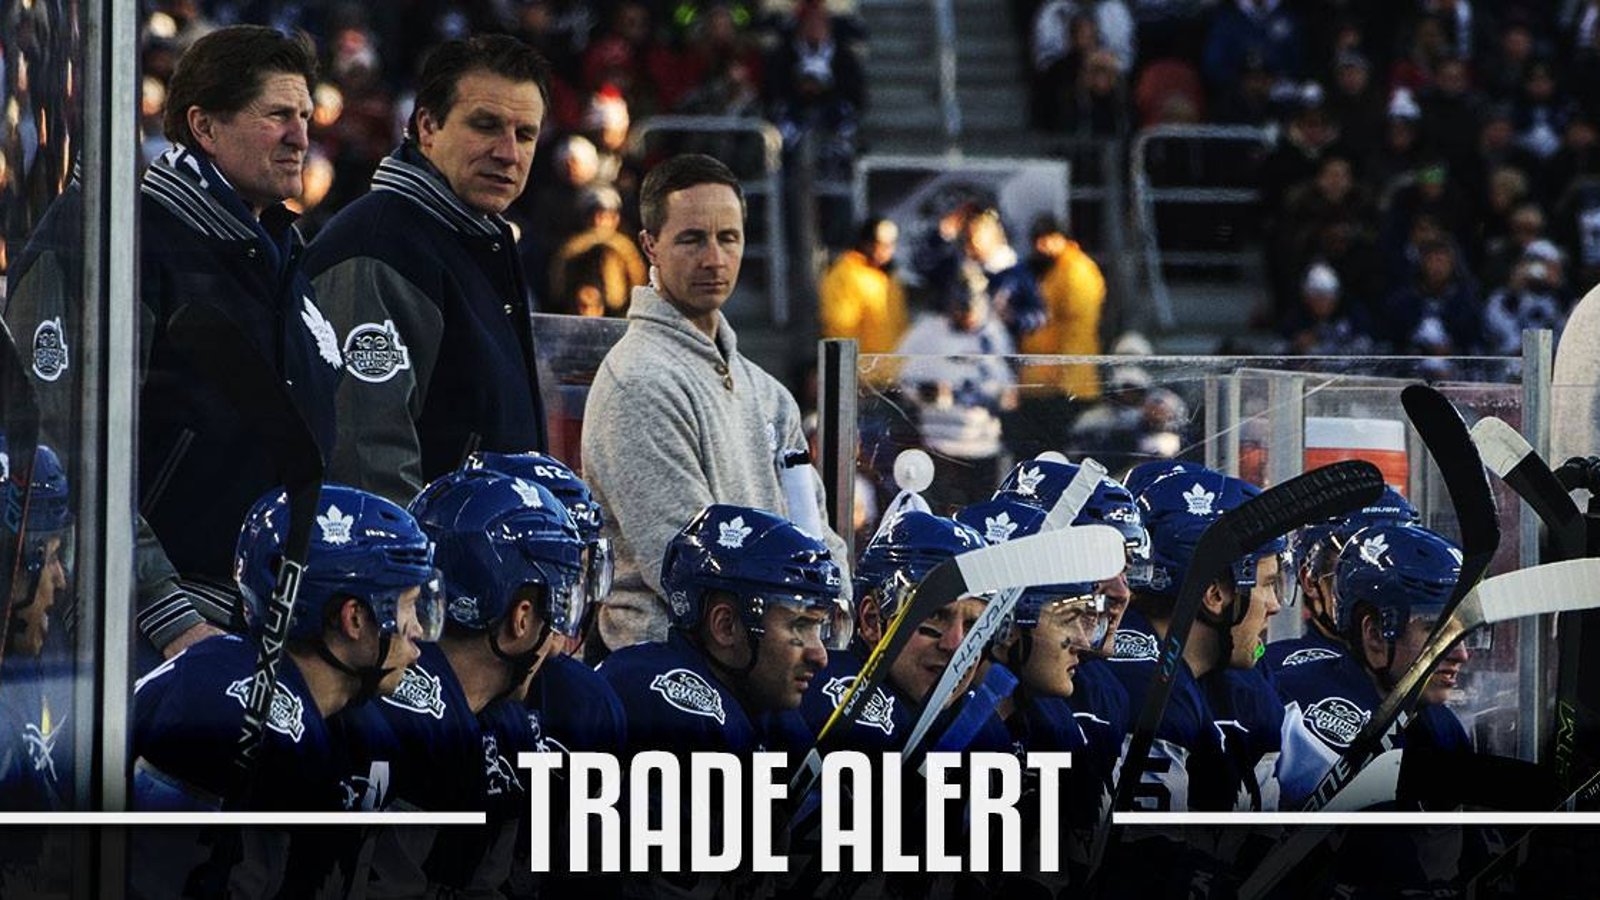 Breaking: The Toronto Maple Leafs have made a last minute trade.